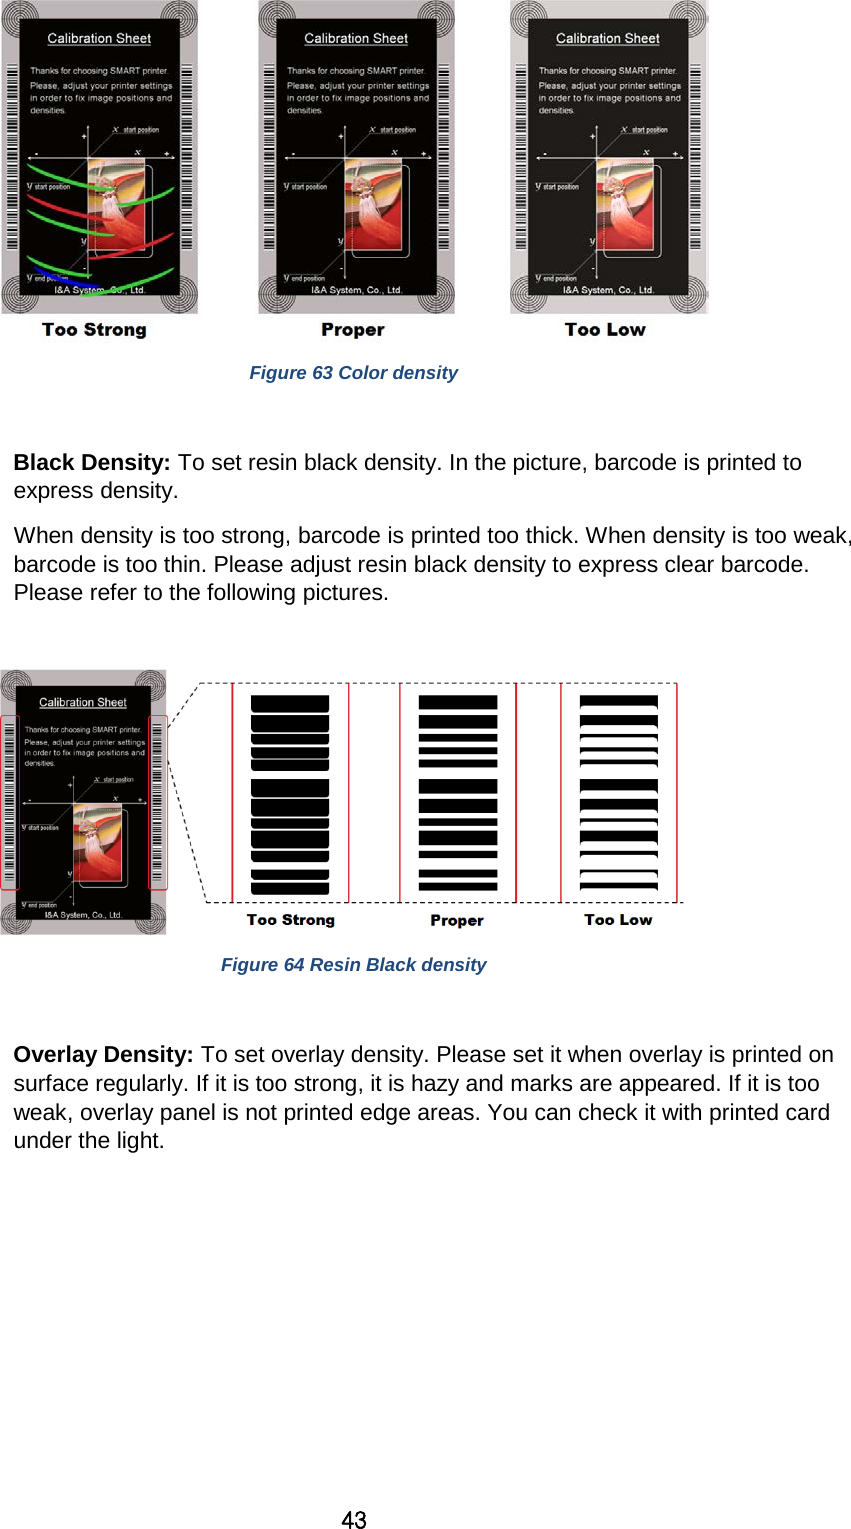 43  Figure 63 Color density  Black Density: To set resin black density. In the picture, barcode is printed to express density.   When density is too strong, barcode is printed too thick. When density is too weak, barcode is too thin. Please adjust resin black density to express clear barcode. Please refer to the following pictures.     Figure 64 Resin Black density  Overlay Density: To set overlay density. Please set it when overlay is printed on surface regularly. If it is too strong, it is hazy and marks are appeared. If it is too weak, overlay panel is not printed edge areas. You can check it with printed card under the light.   